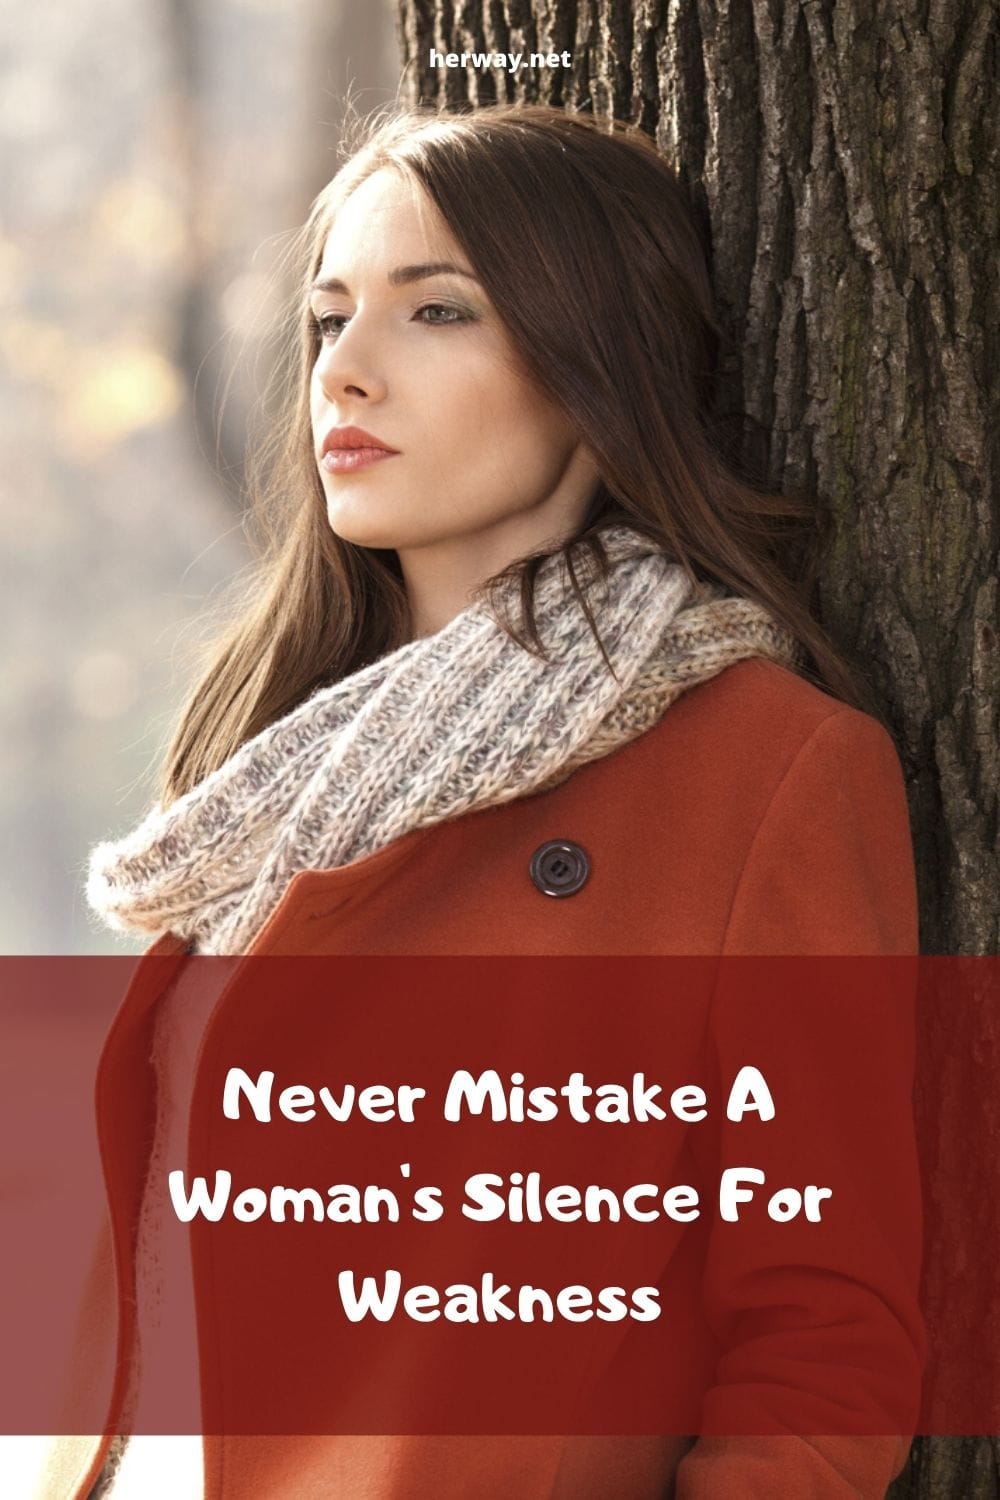 Never Mistake A Woman's Silence For Weakness